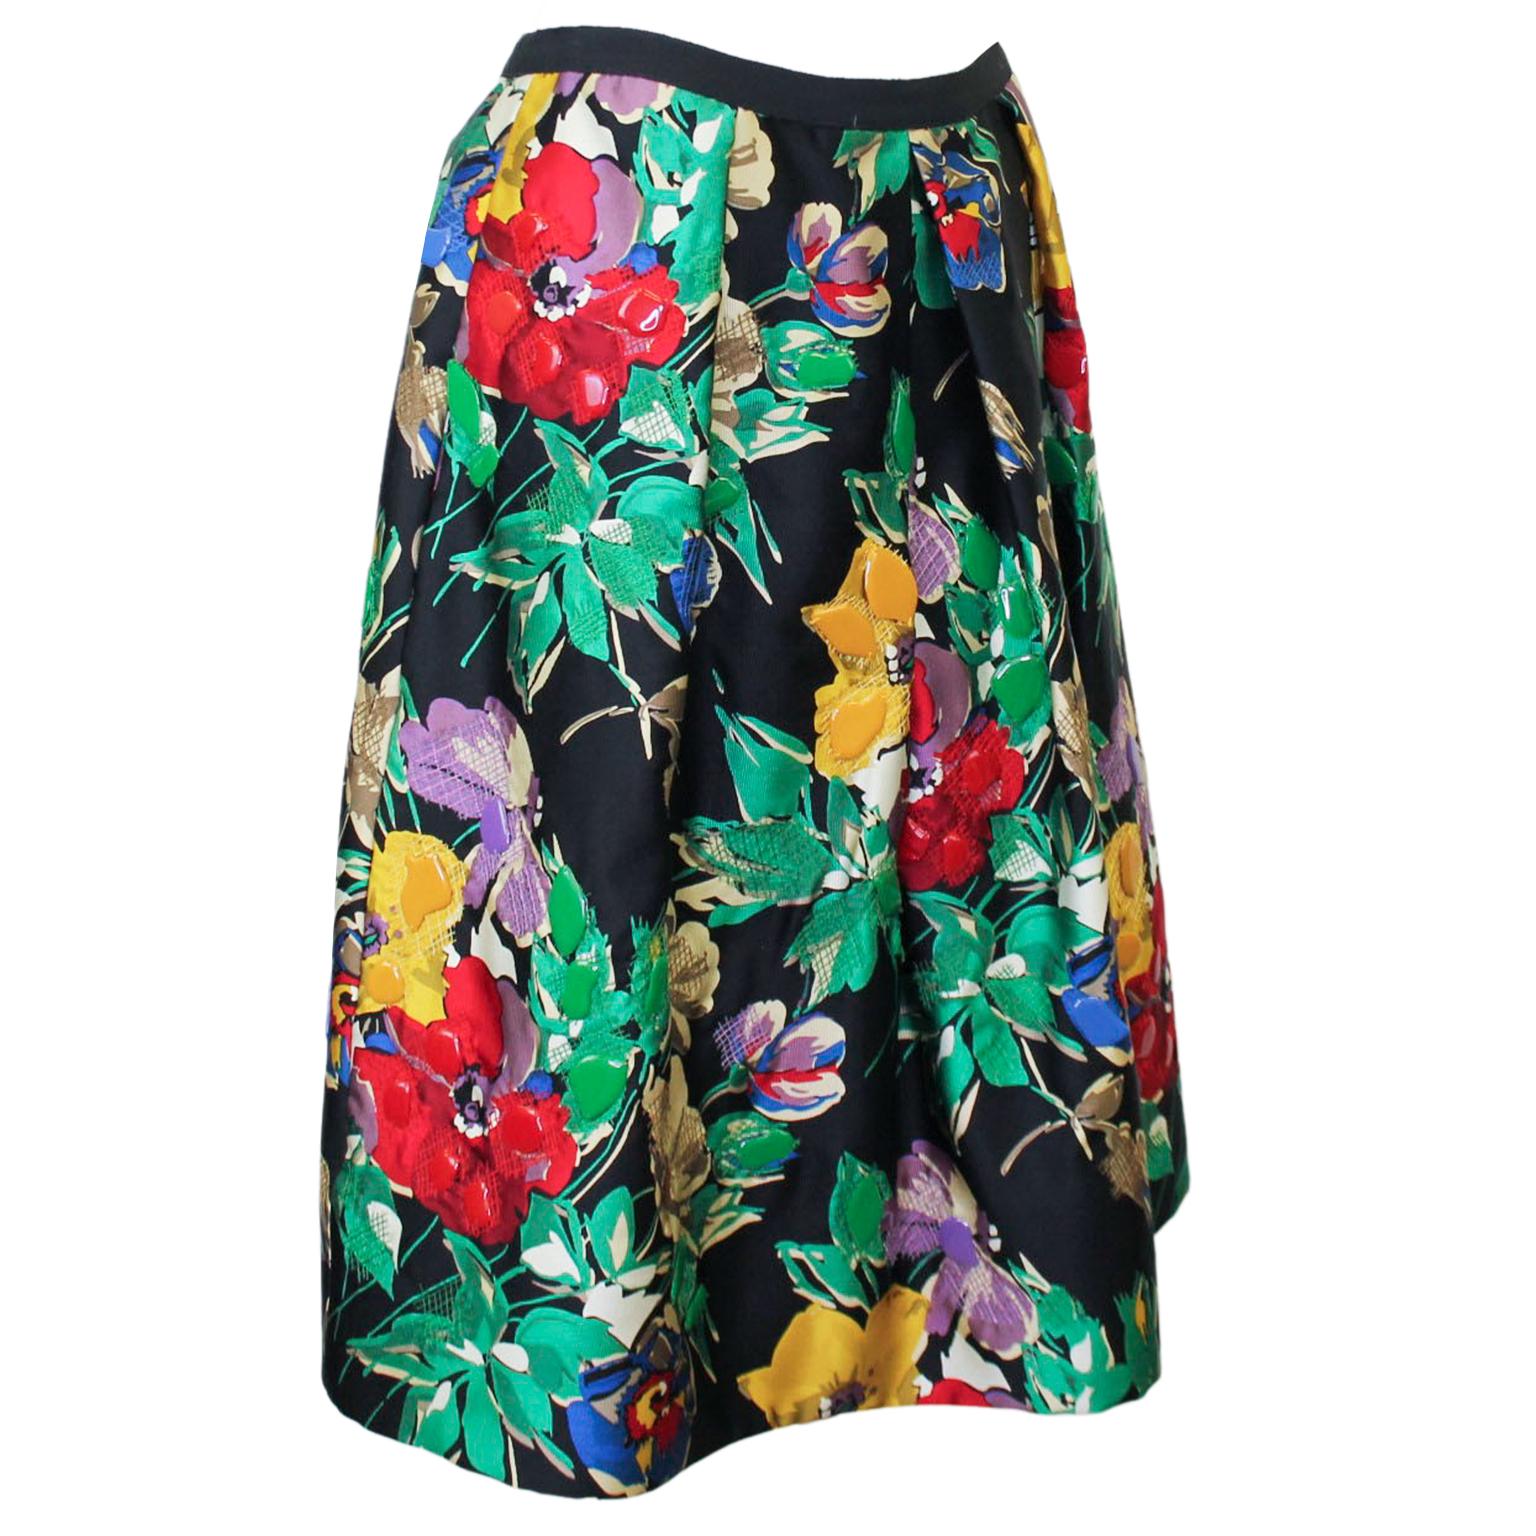 Early 2000s Oscar de la Renta black silk skirt with a vibrantly colored floral print. The skirt has an inverted center pleat and mirrored single pleats on either hip. Same in the back. Zips up the back and has a black grosgrain waistband. The floral